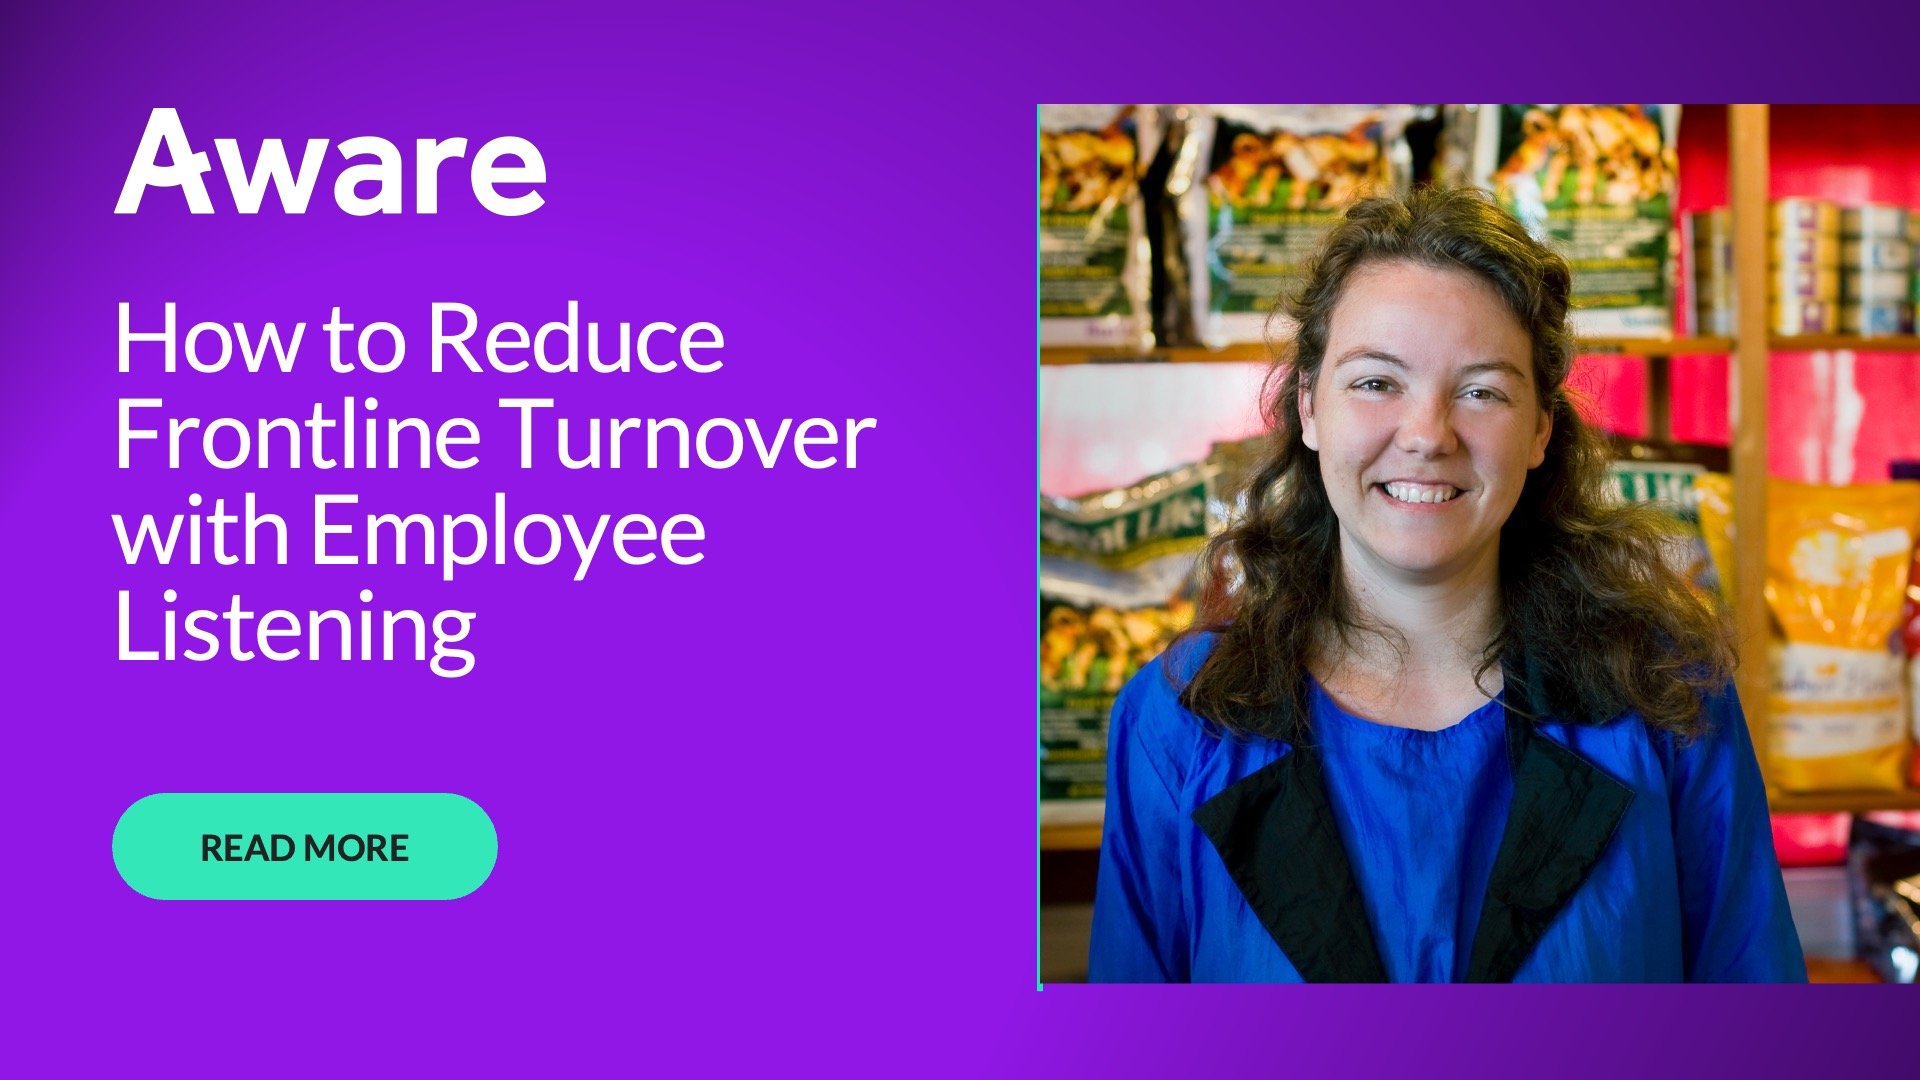 How to Reduce Frontline Turnover with Employee Listening